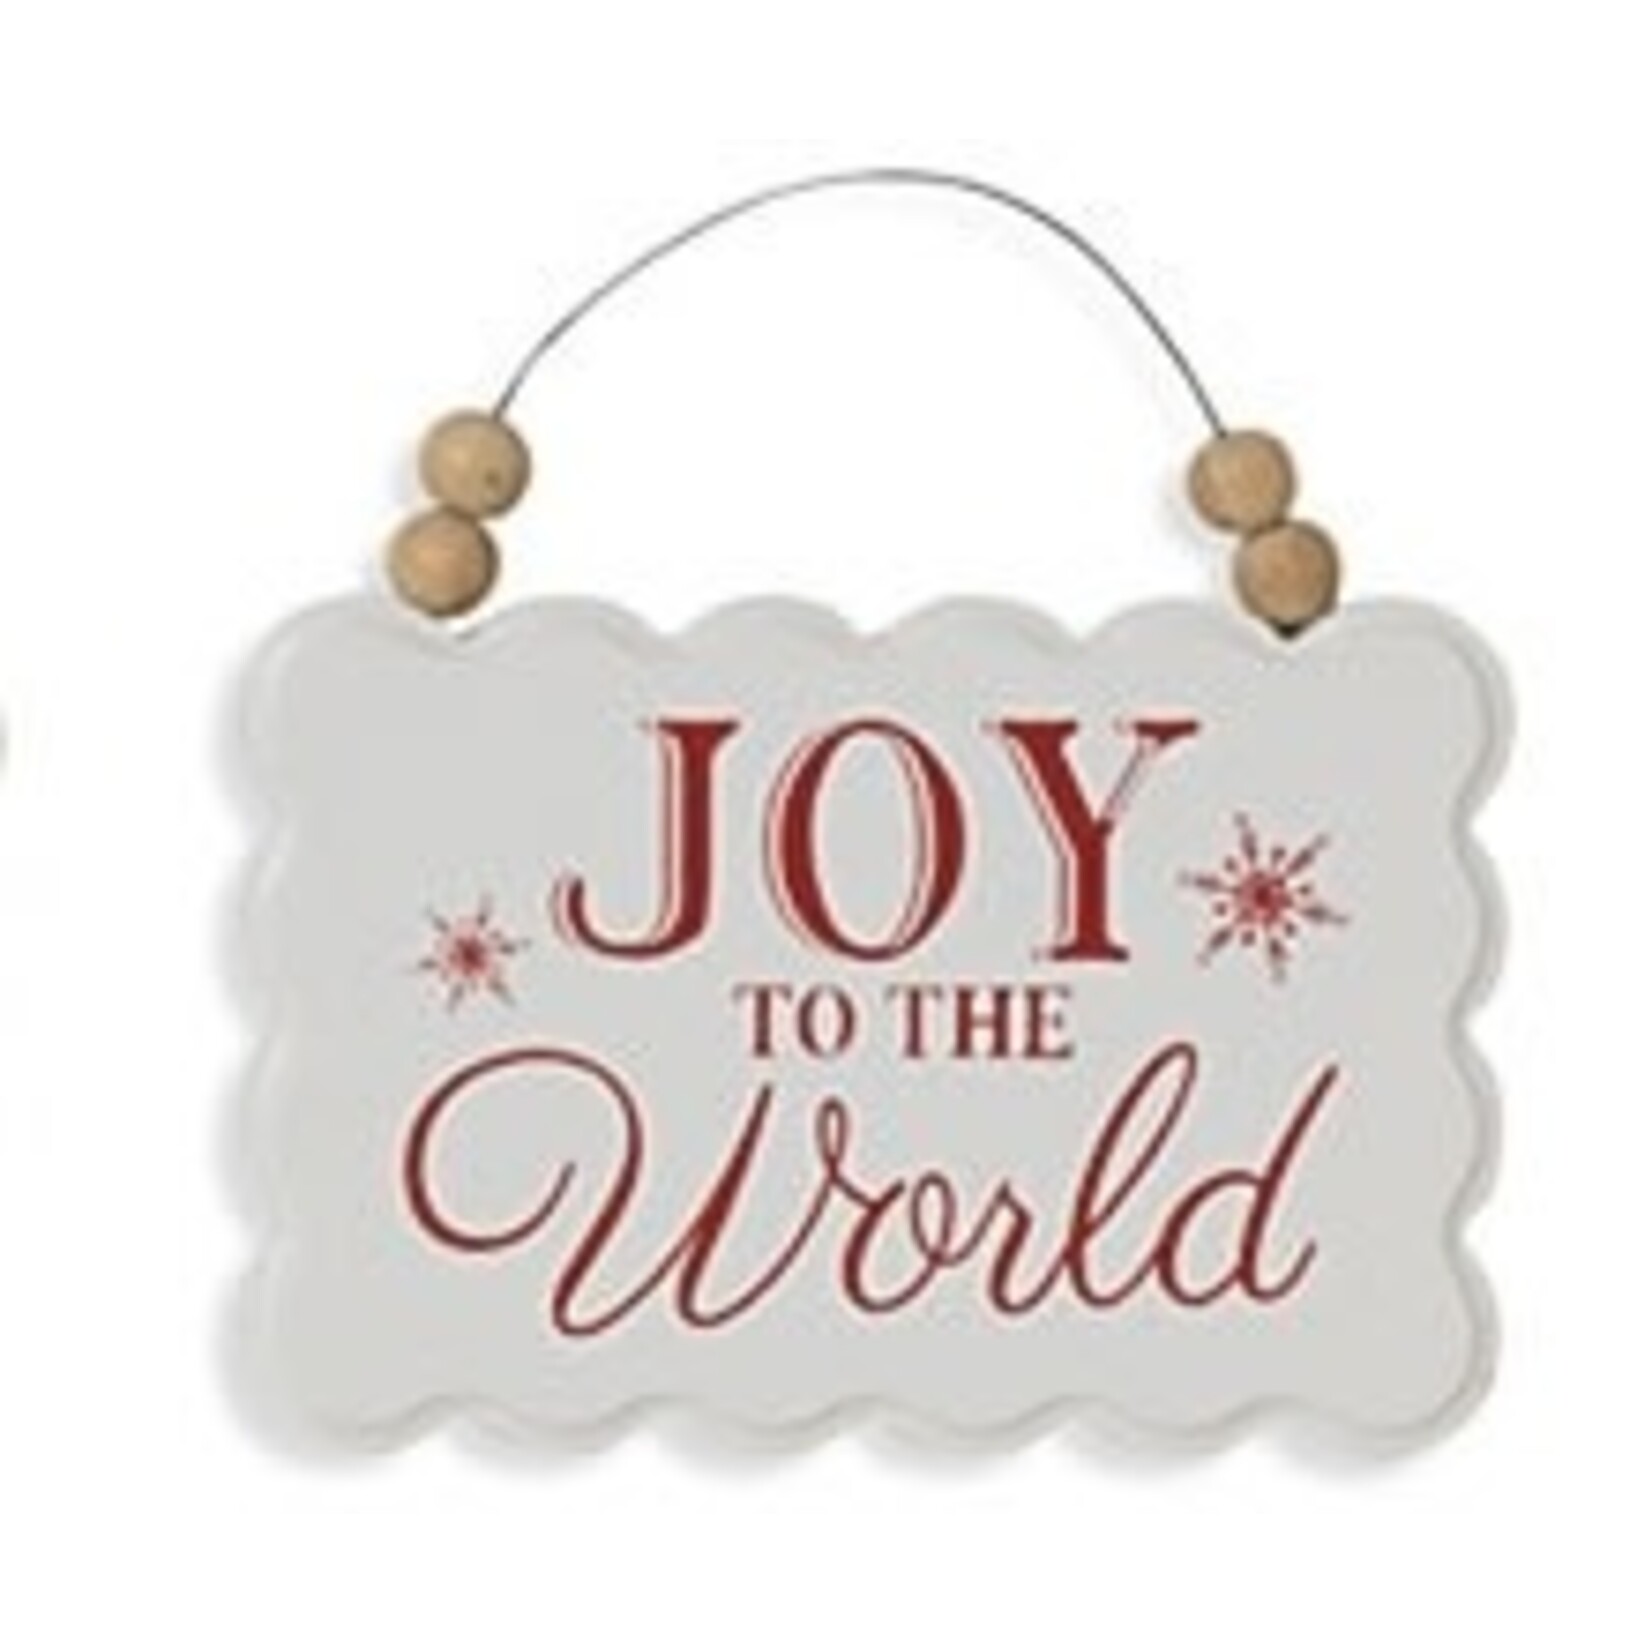 Gerson Holiday Sign Ornament